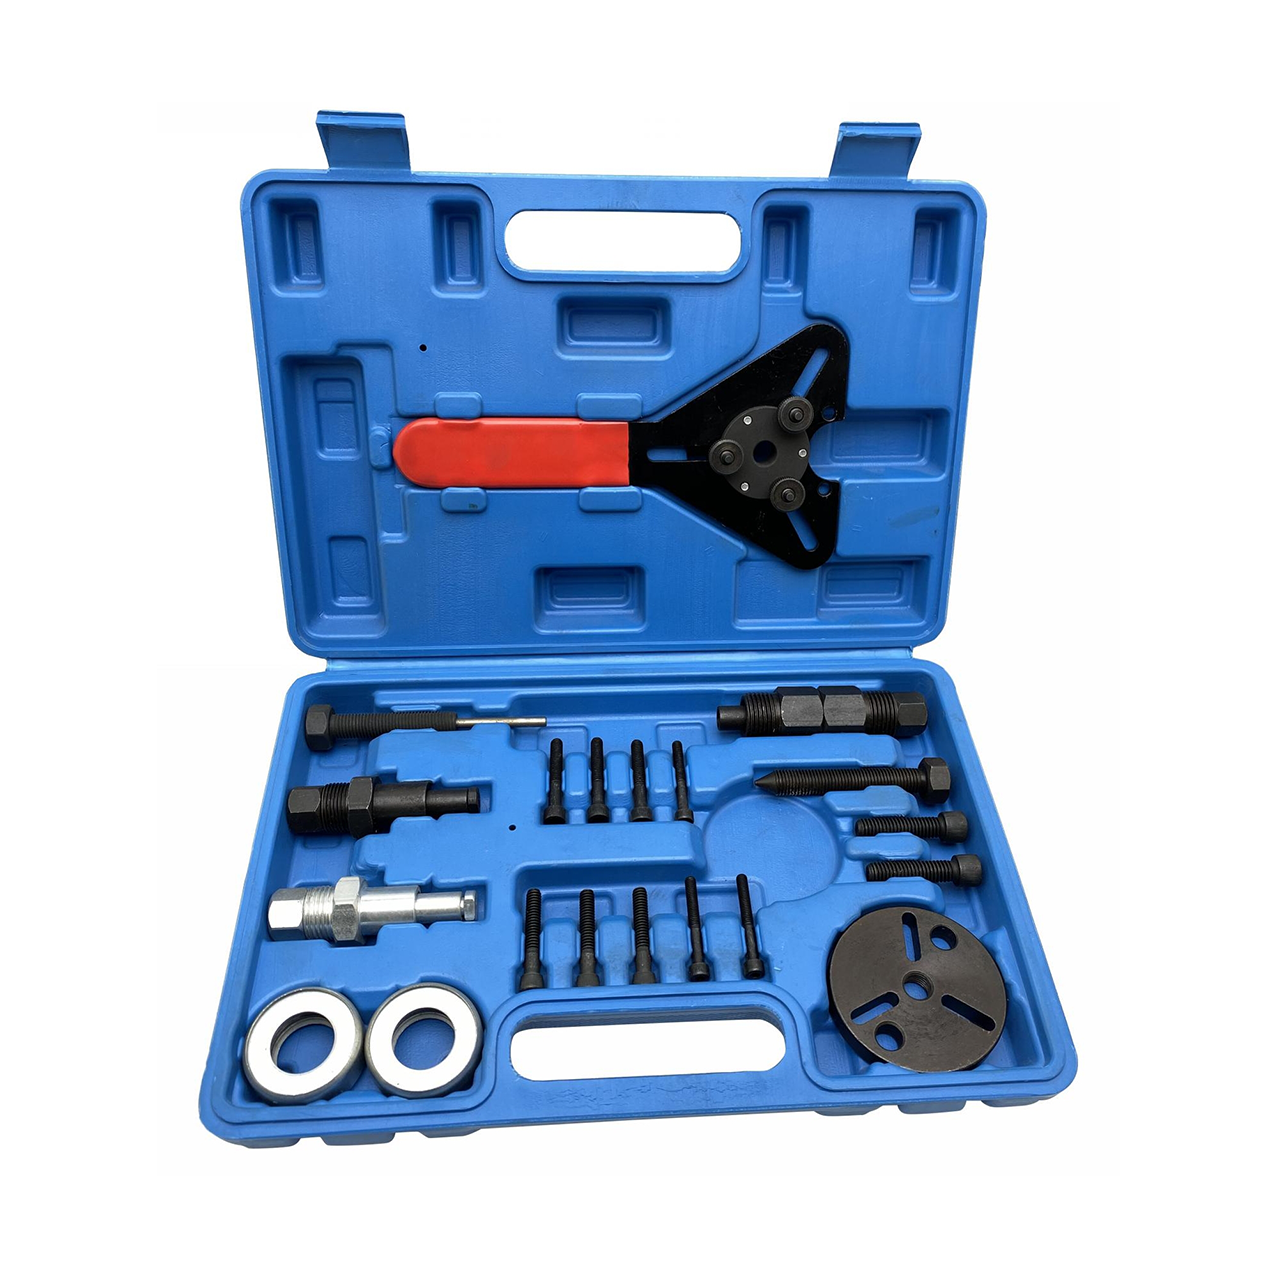  Automorive Air Condition Clutch Tool Kit